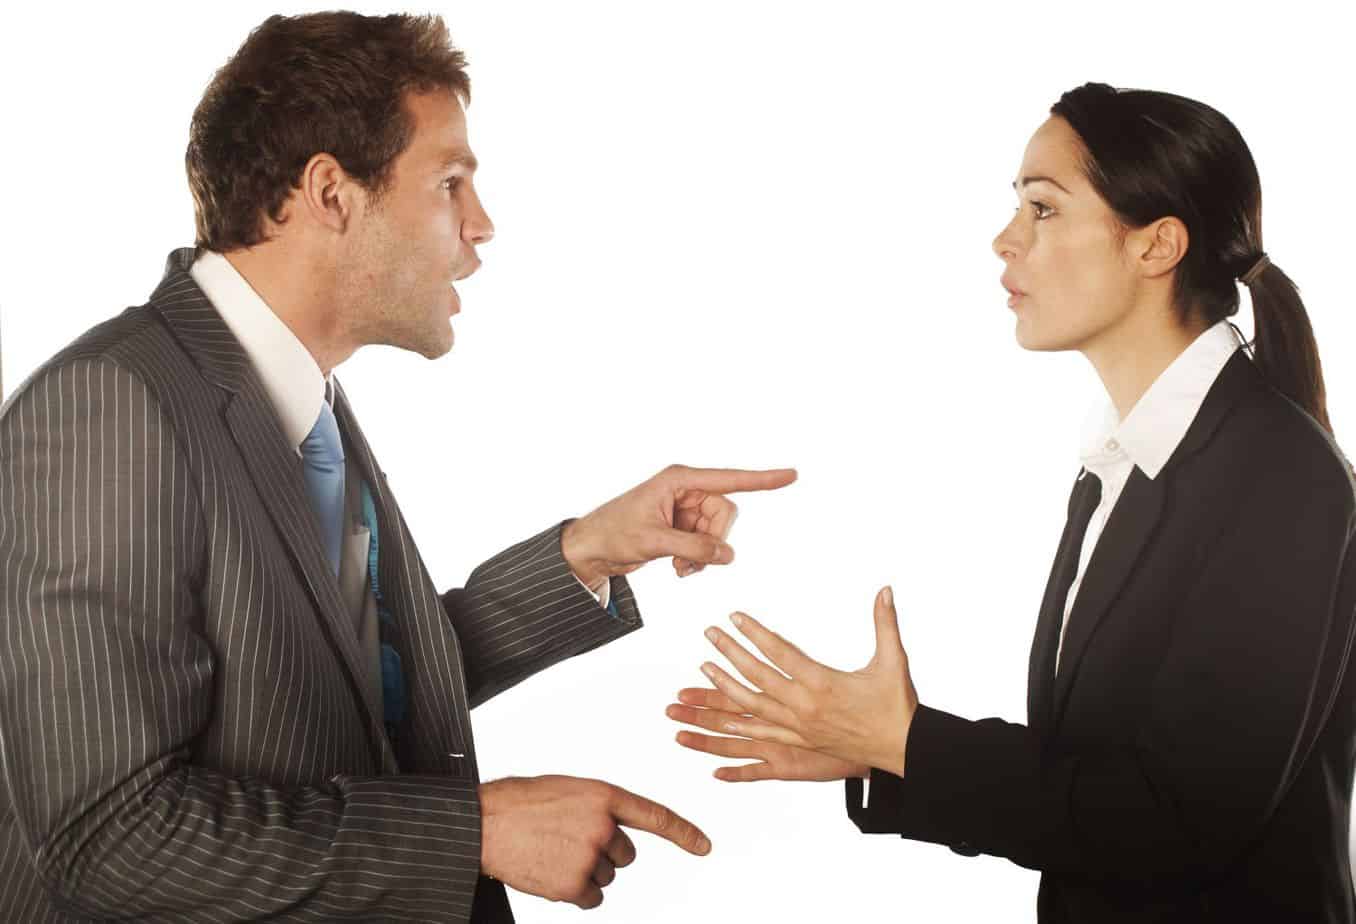 Featured image for “Are You Being Too Defensive When Receiving Feedback?”